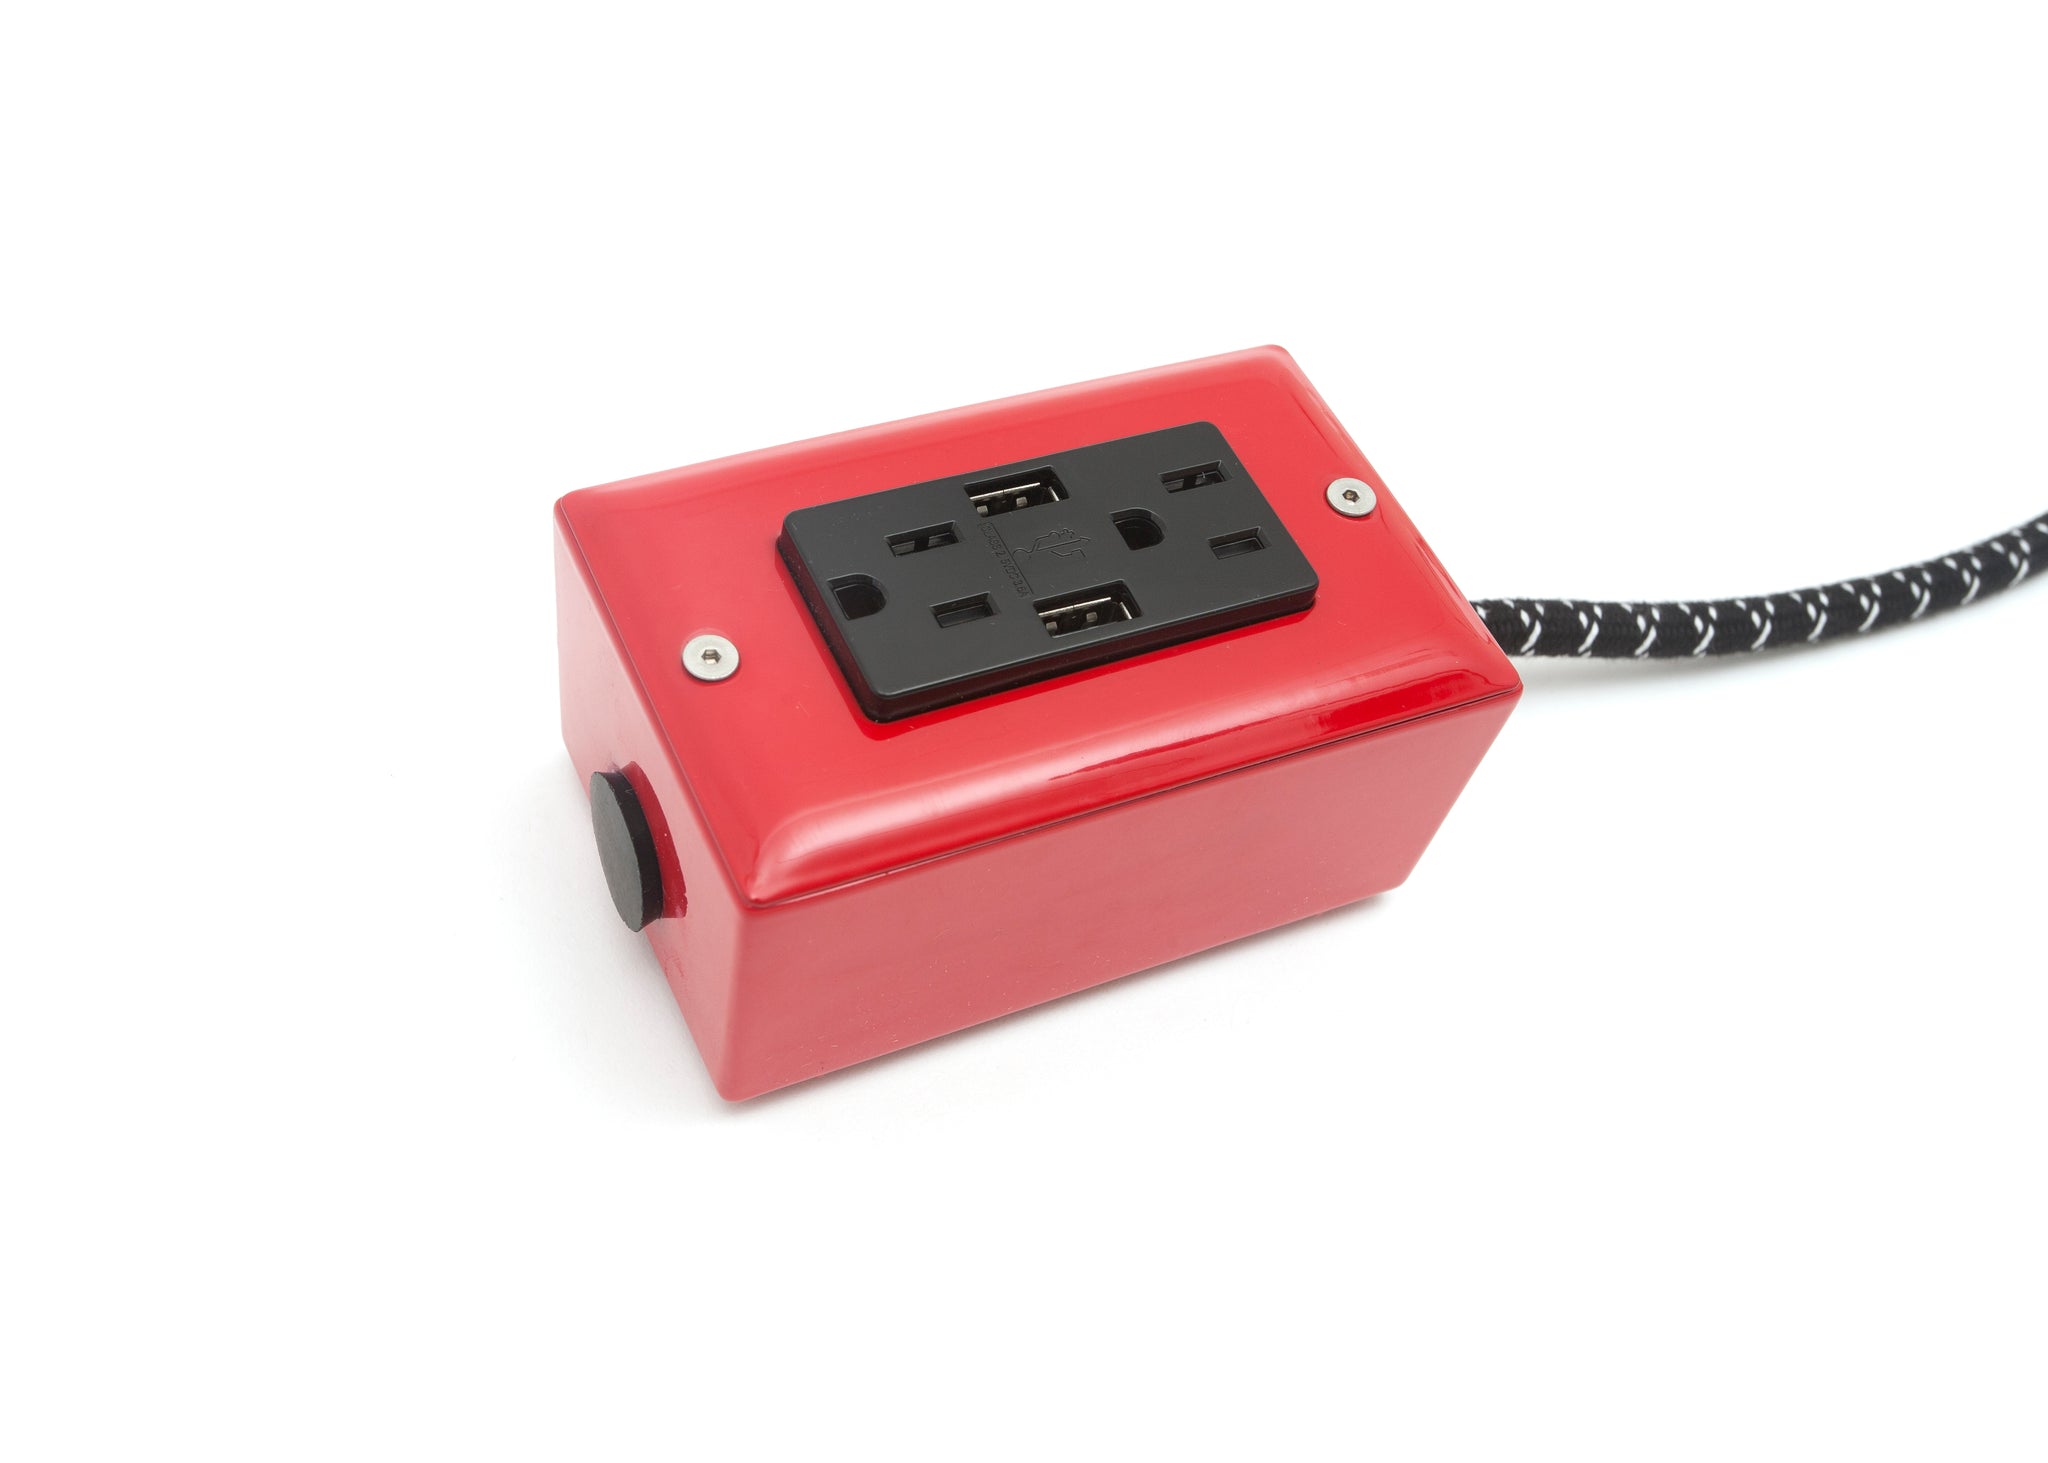 The First Smart Chip Extension Cord - 12' Extō Dual-USB, Dual-Outlet - Bottle Rocket Red